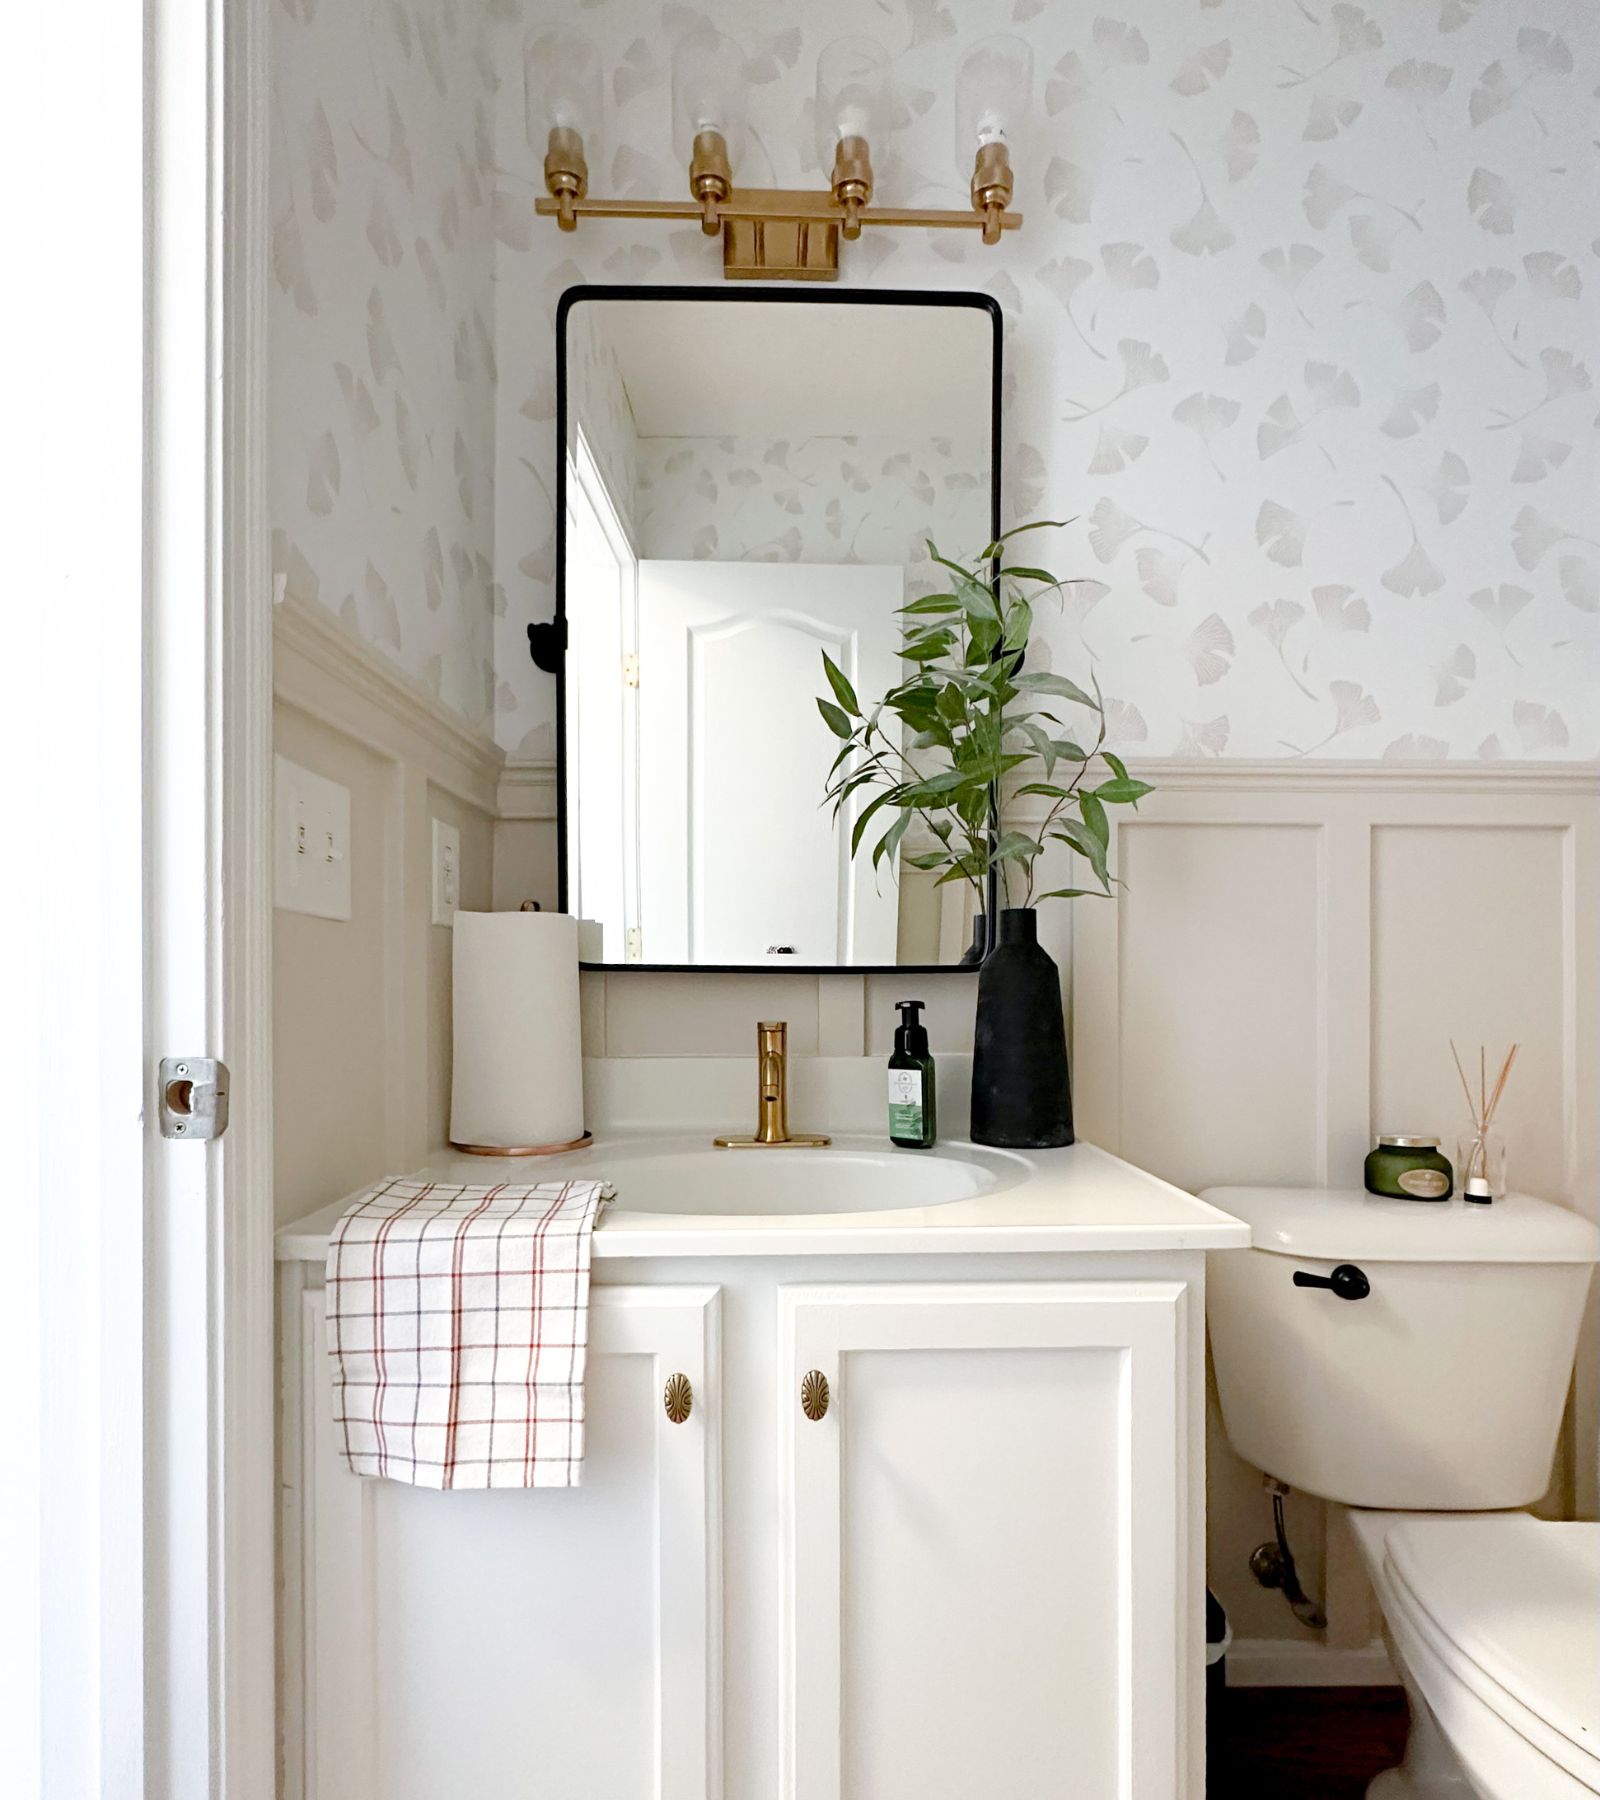 https://homebyalley.com/wp-content/uploads/2023/01/How-Much-Space-Should-Be-Between-Mirror-and-Faucet.jpg